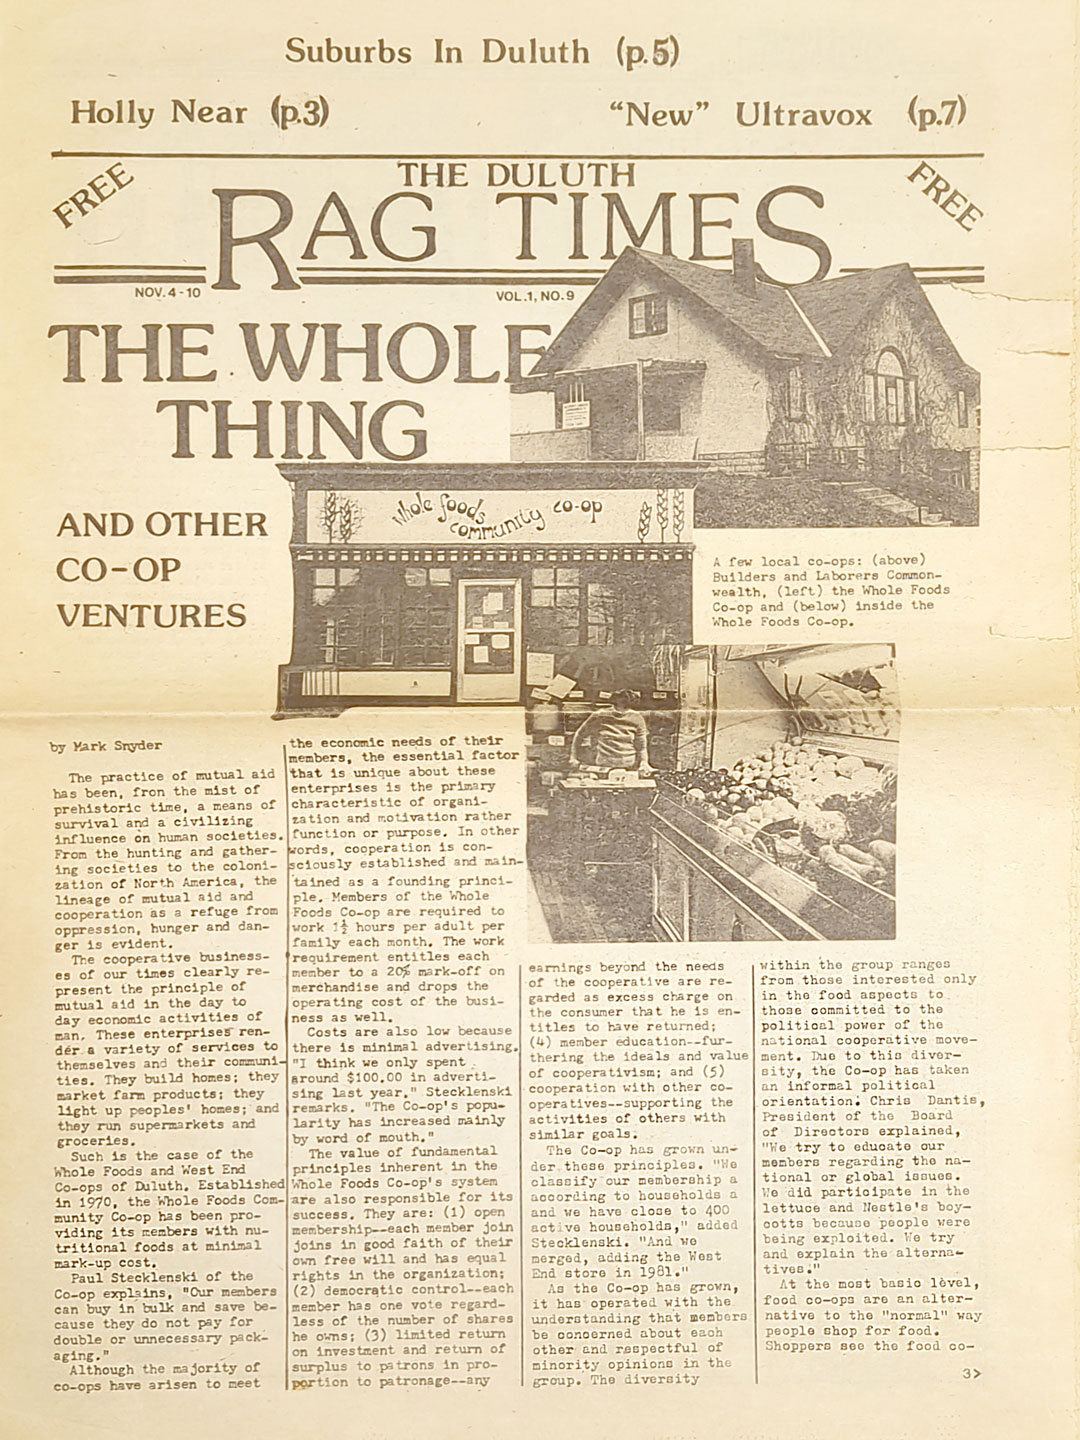 Black and white cover of "The Duluth Rag Times" issue from Nov. 4-10, featuring a photo of a co-op building, possibly the Whole Foods Coop Duluth MN, and text on "The Whole Thing and Other Co-Op Ventures." The page includes articles, photo captions, and headings for other sections such as Holly Near and Ultravox.